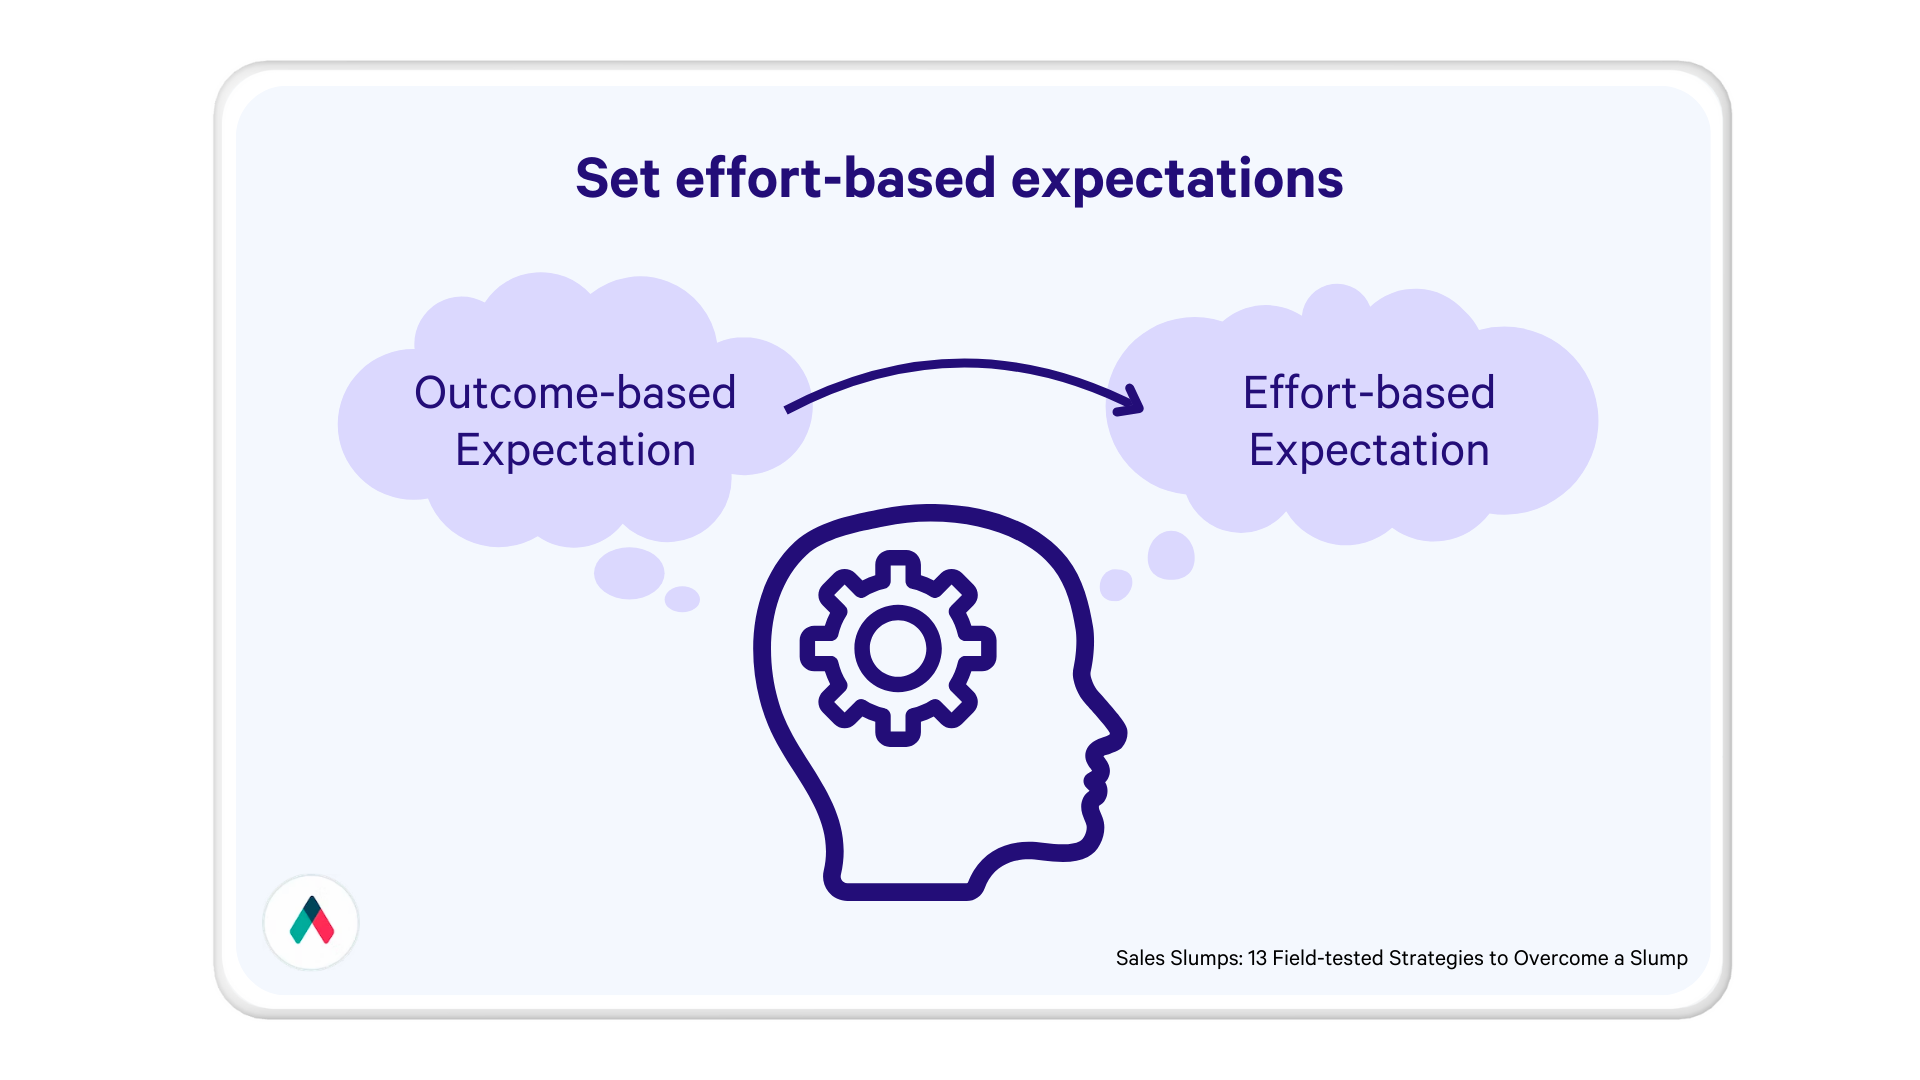 an illustration of a head that shows to change outcome-based expectations to effort-based expectation